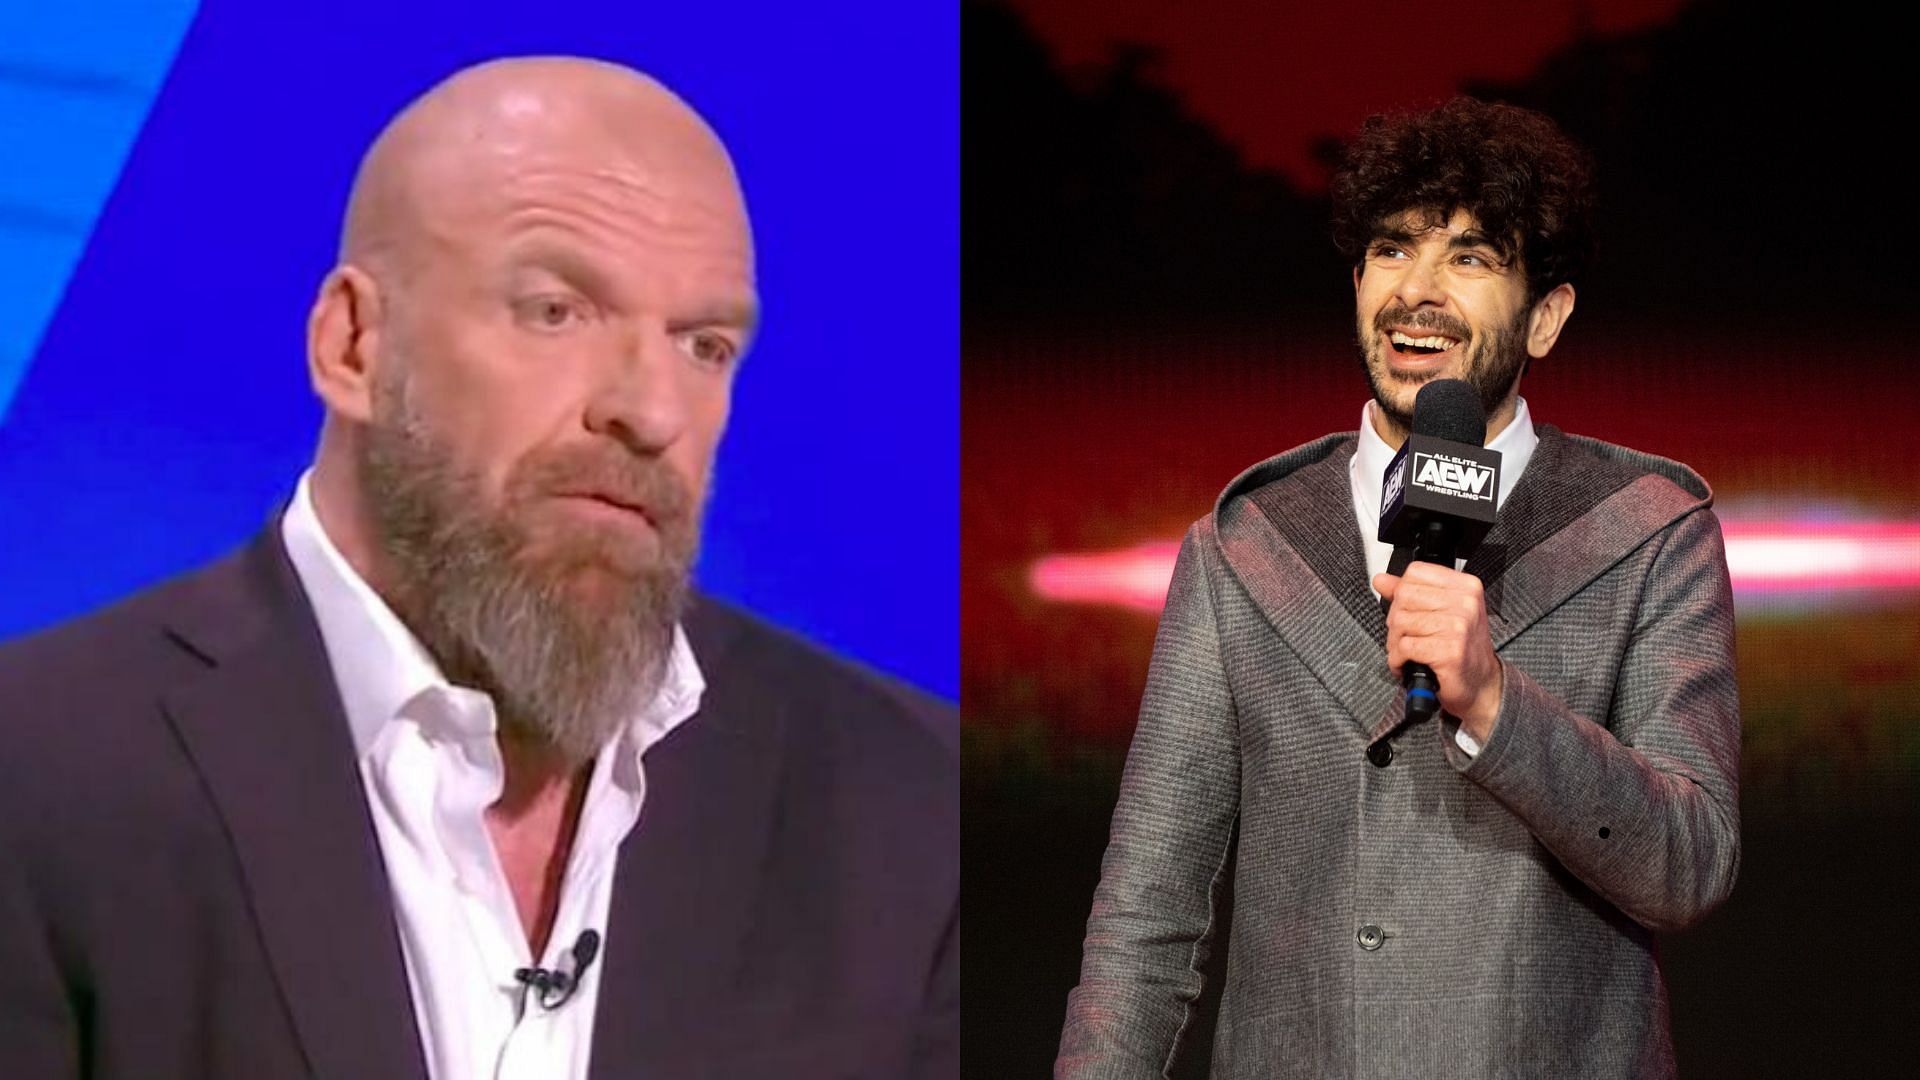 Triple H and Tony Khan are big names in WWE and AEW respectively